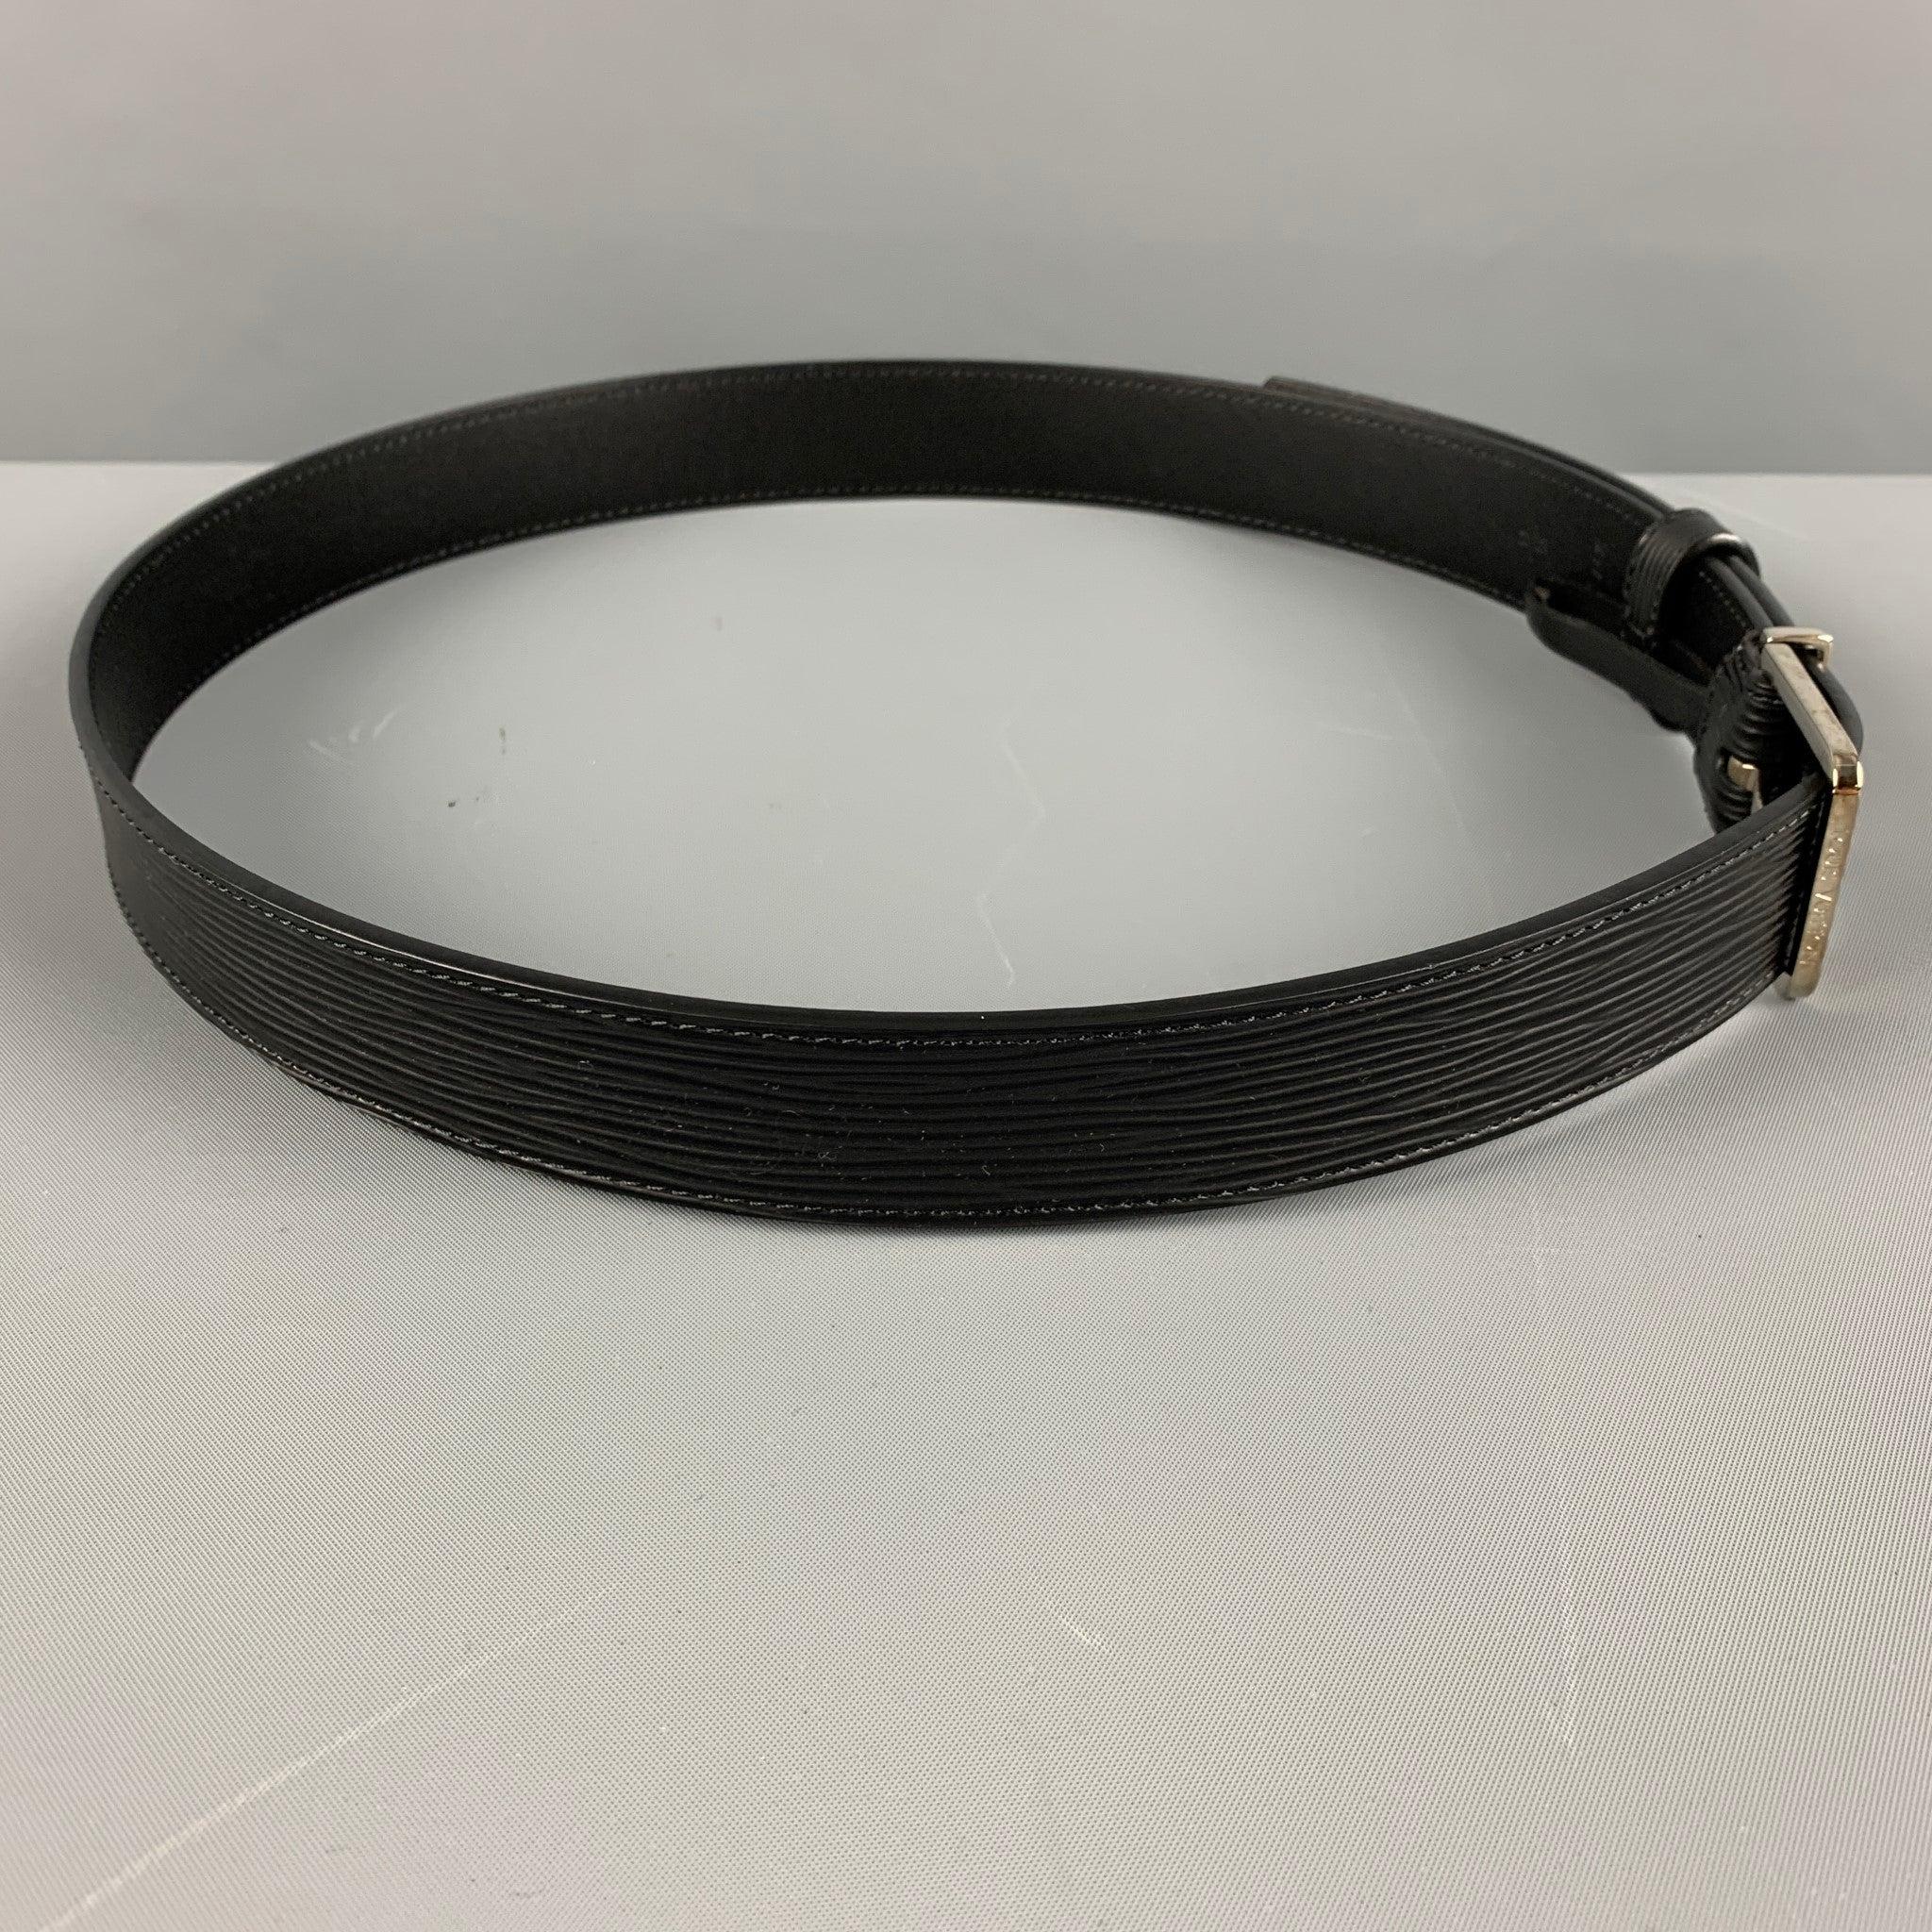 LOUIS VUITTON Waist Size 34 Black Textured Leather Belt In Excellent Condition For Sale In San Francisco, CA